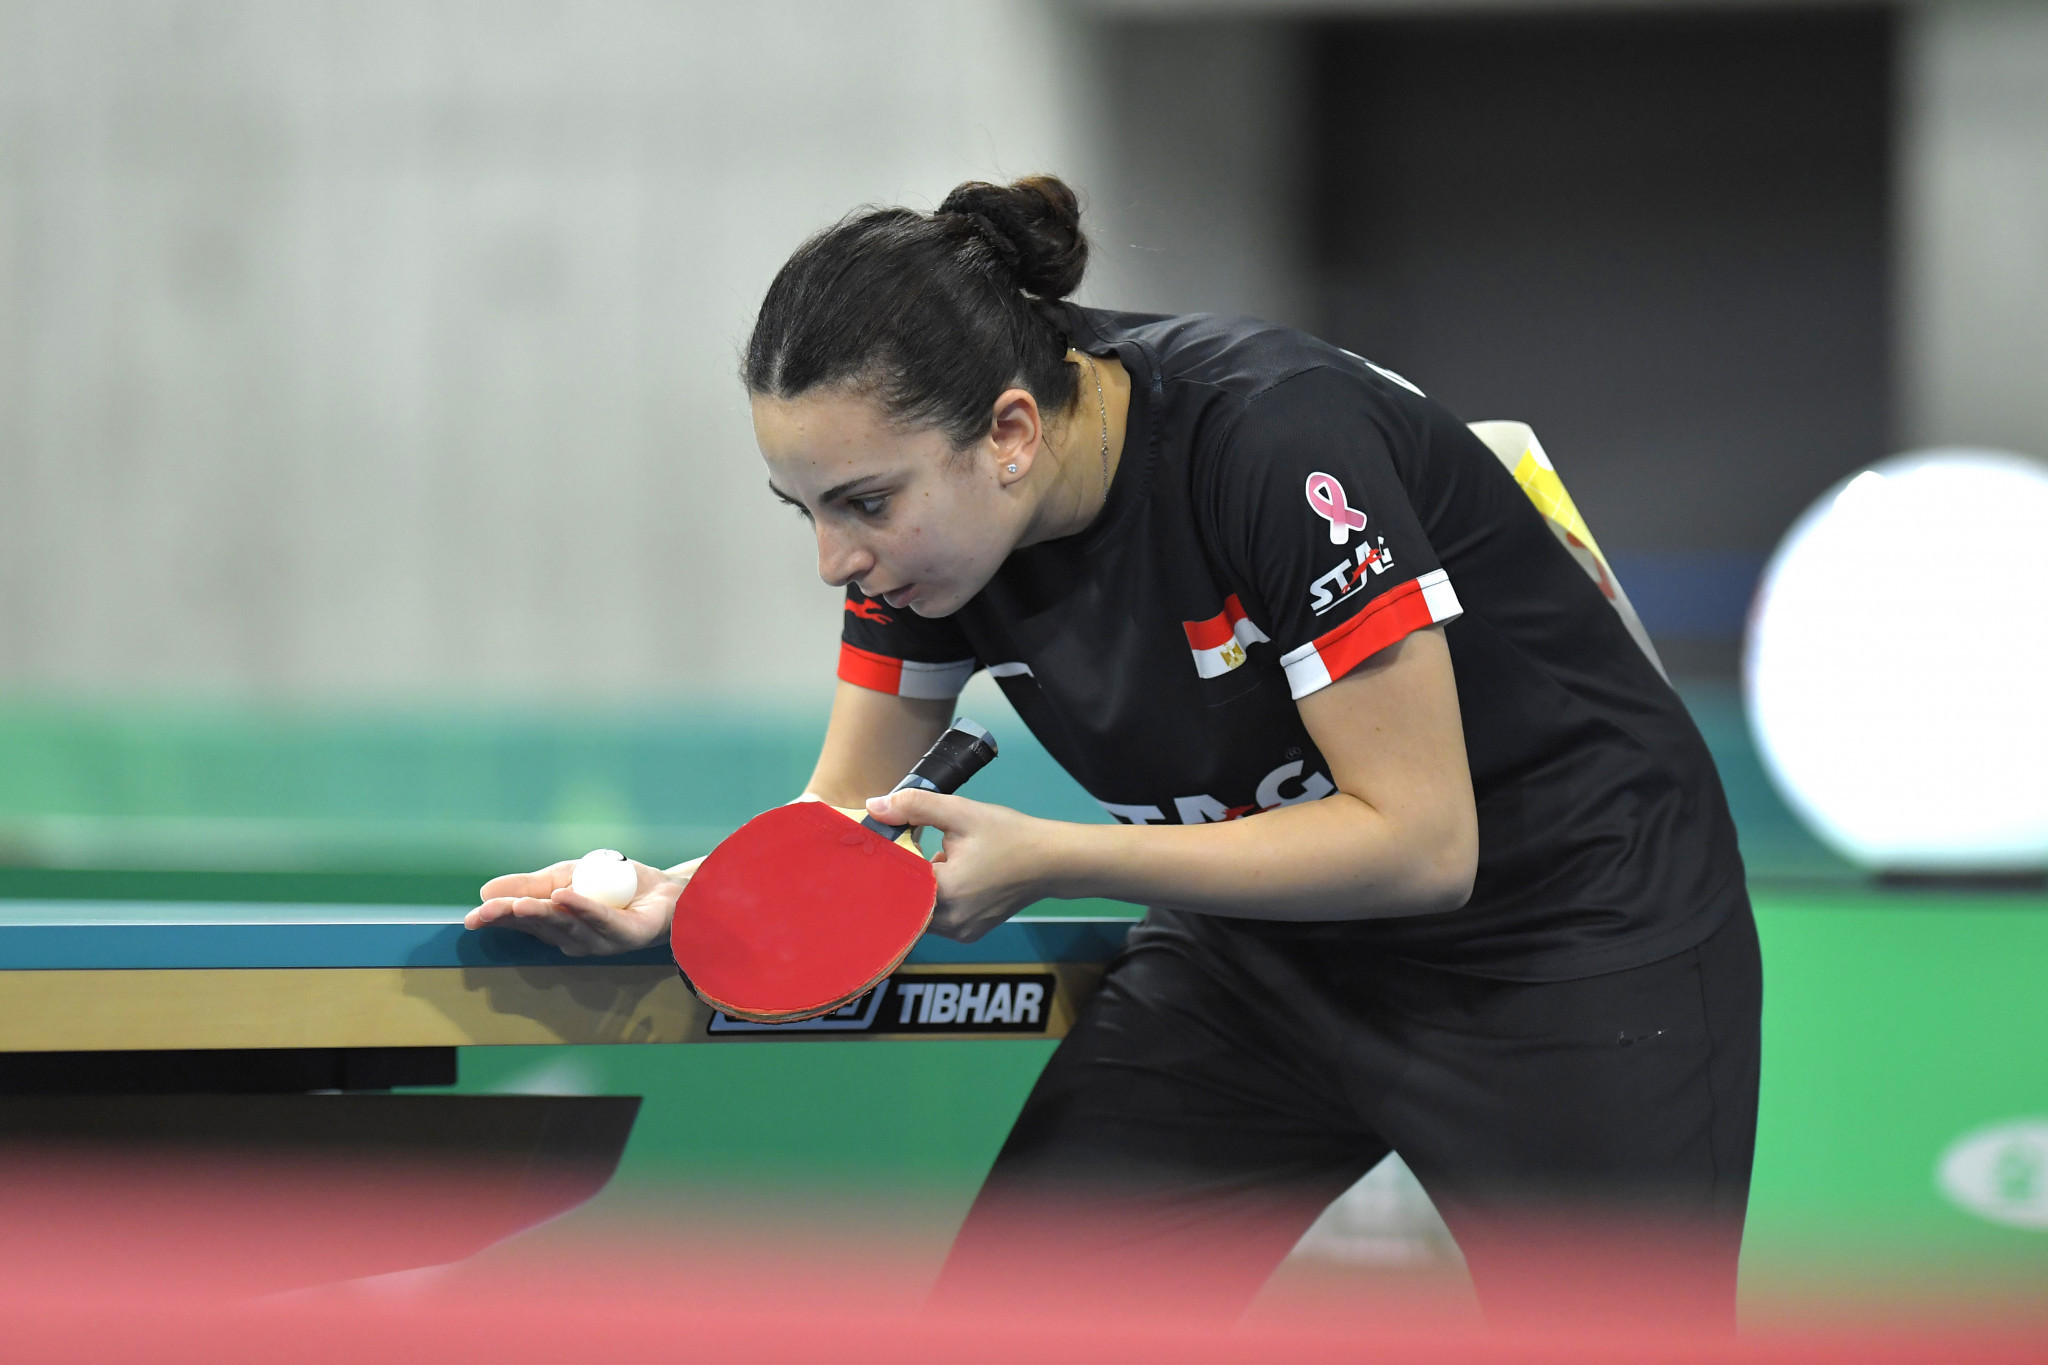 The ITTF Africa Cup gets underway in Lagos tomorrow, with Dina Meshref among the top-ranked players ©ITTF-Africa